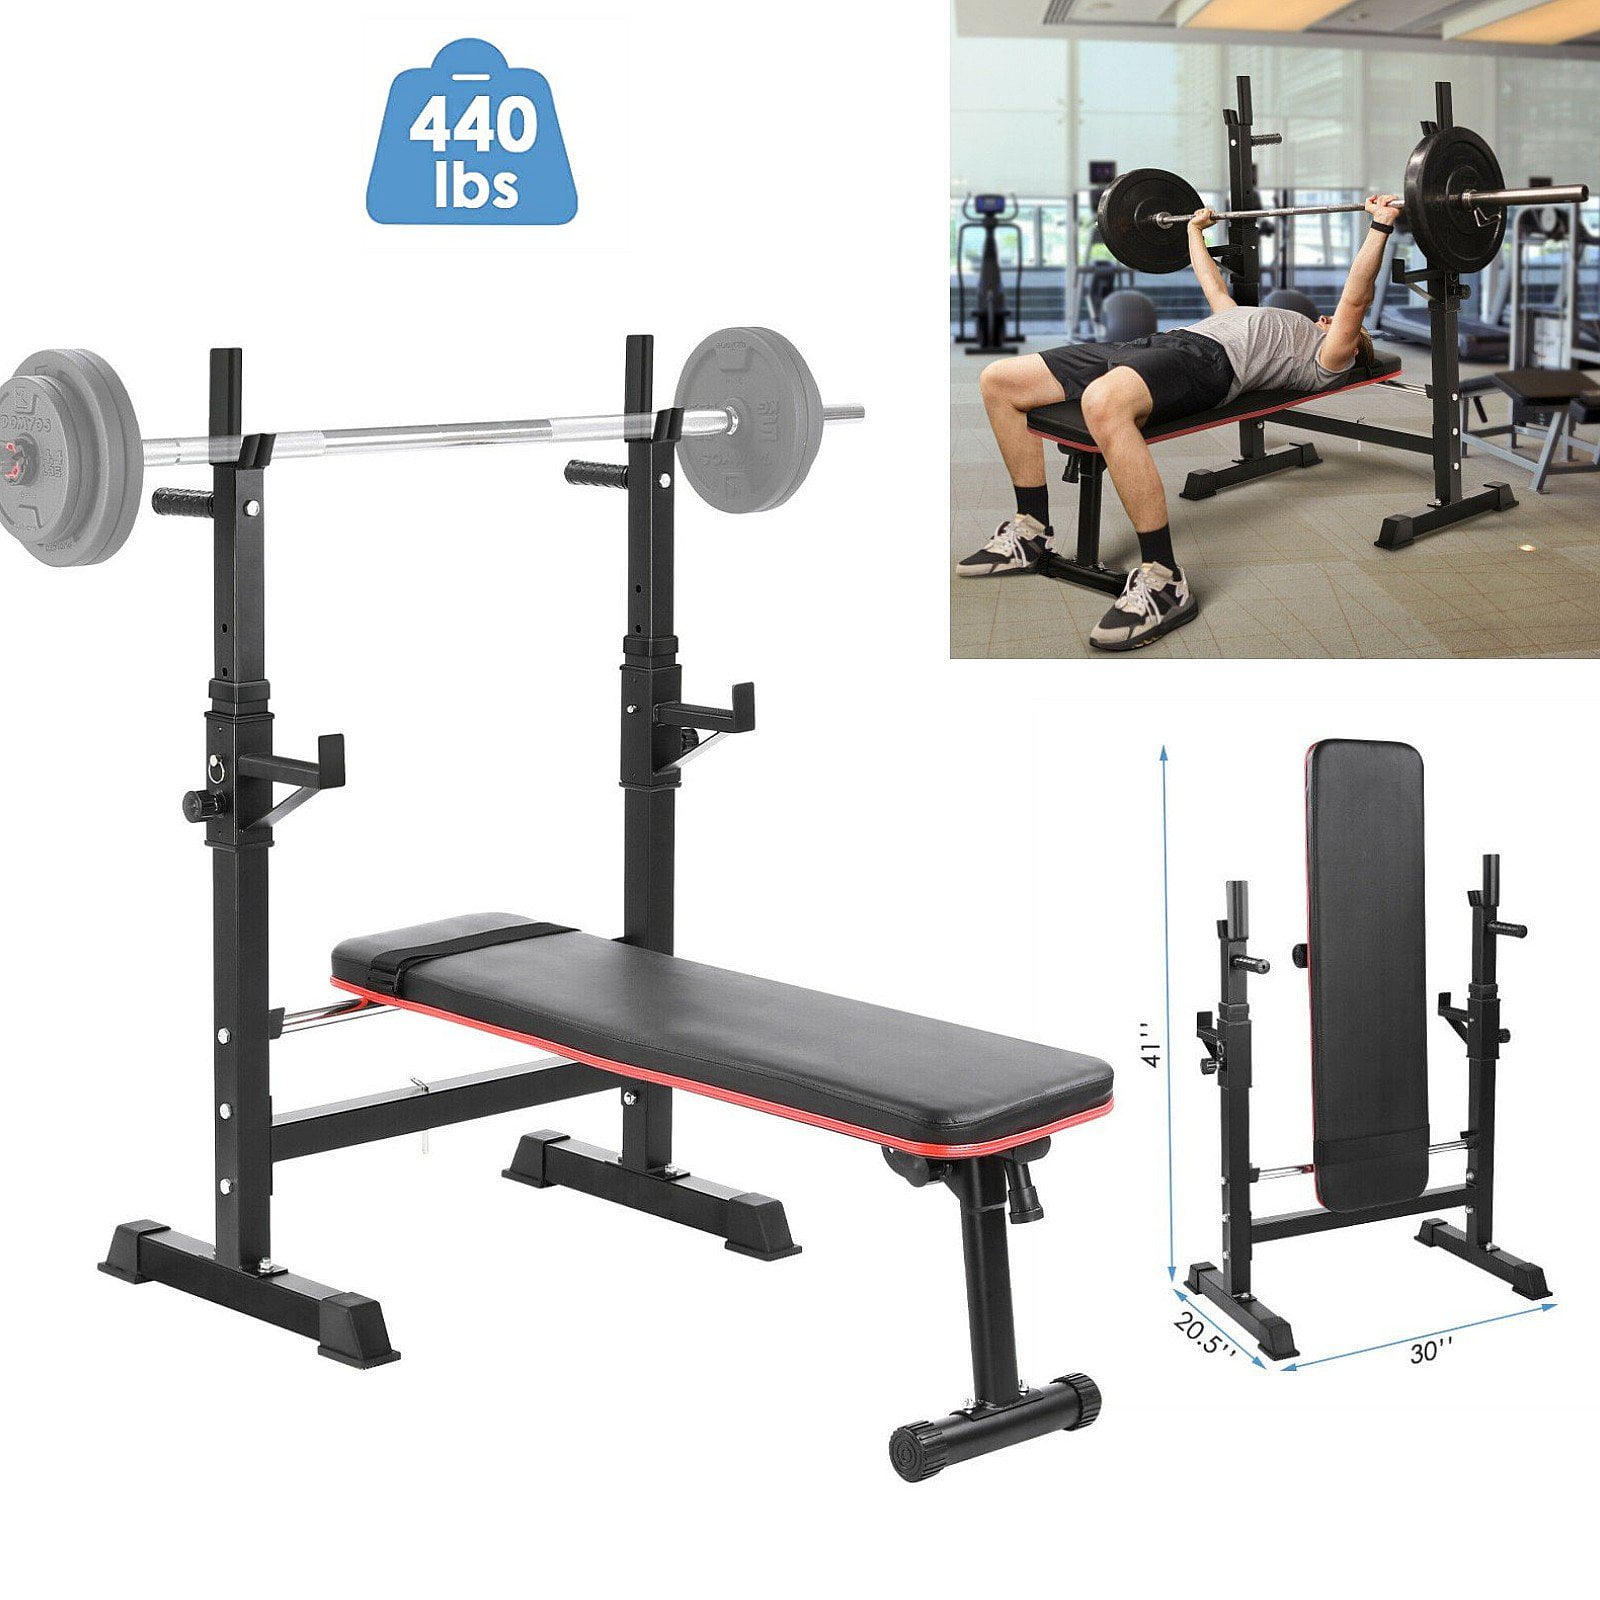 Bench Weight Bench With Barbell Rack Squat Rack home gym foldable adjustable bars 